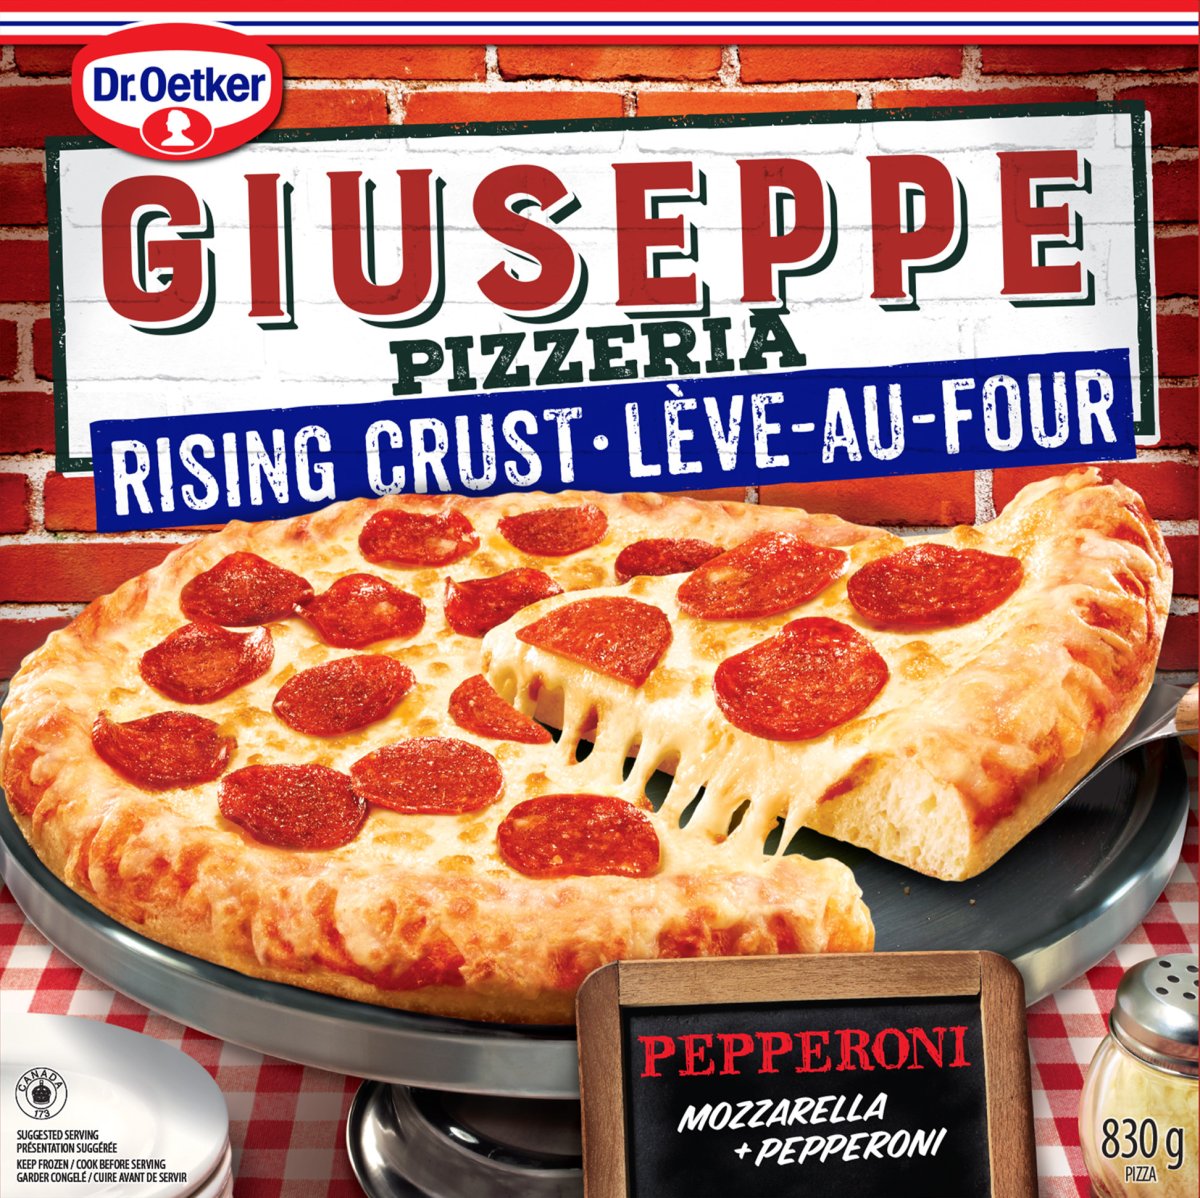 Dr. Oetker has announced it will be closing its Grand Falls, N.B. frozen pizza plant at the May.